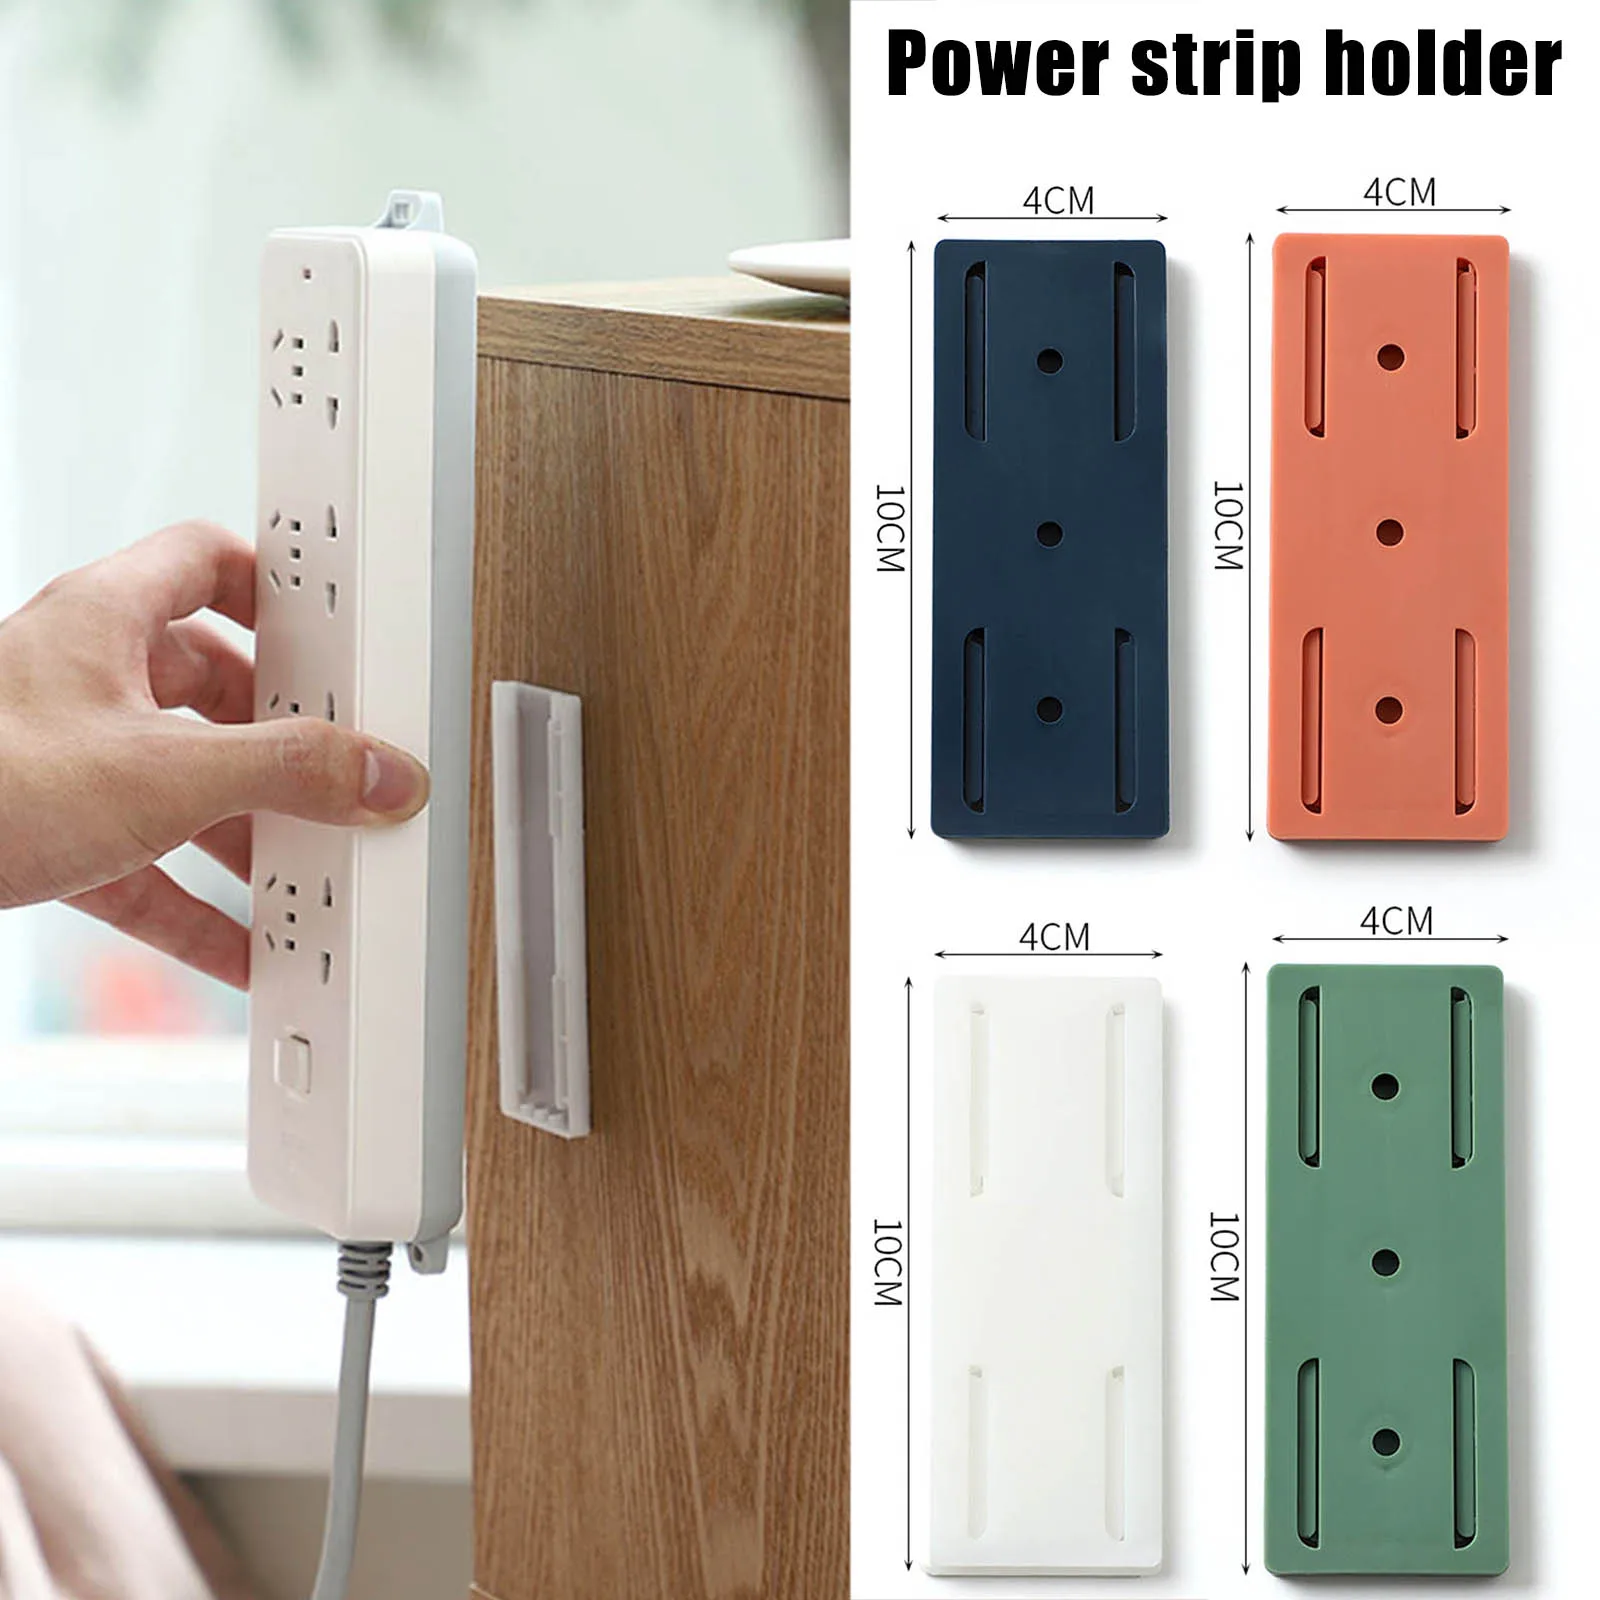 

Socket Holder Organizer Socket Fixer Powerful Traceless Wall-mounted Self-adhesive Cable Seamless Power Strip Hold Wire Holder